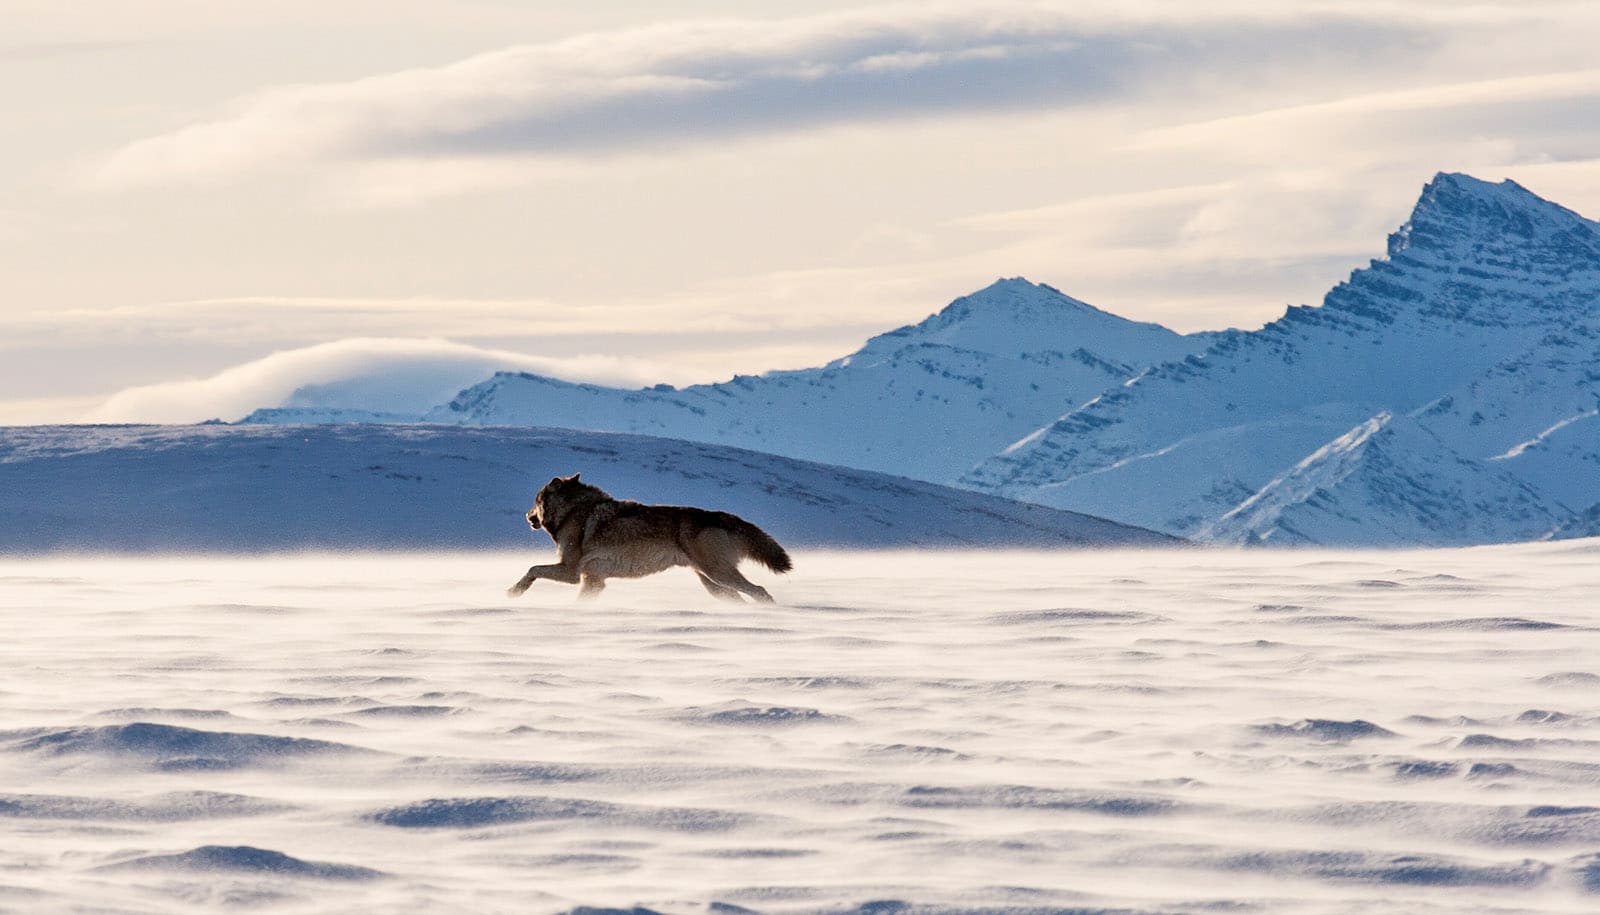 wolf runs across snowy landscape with mountains